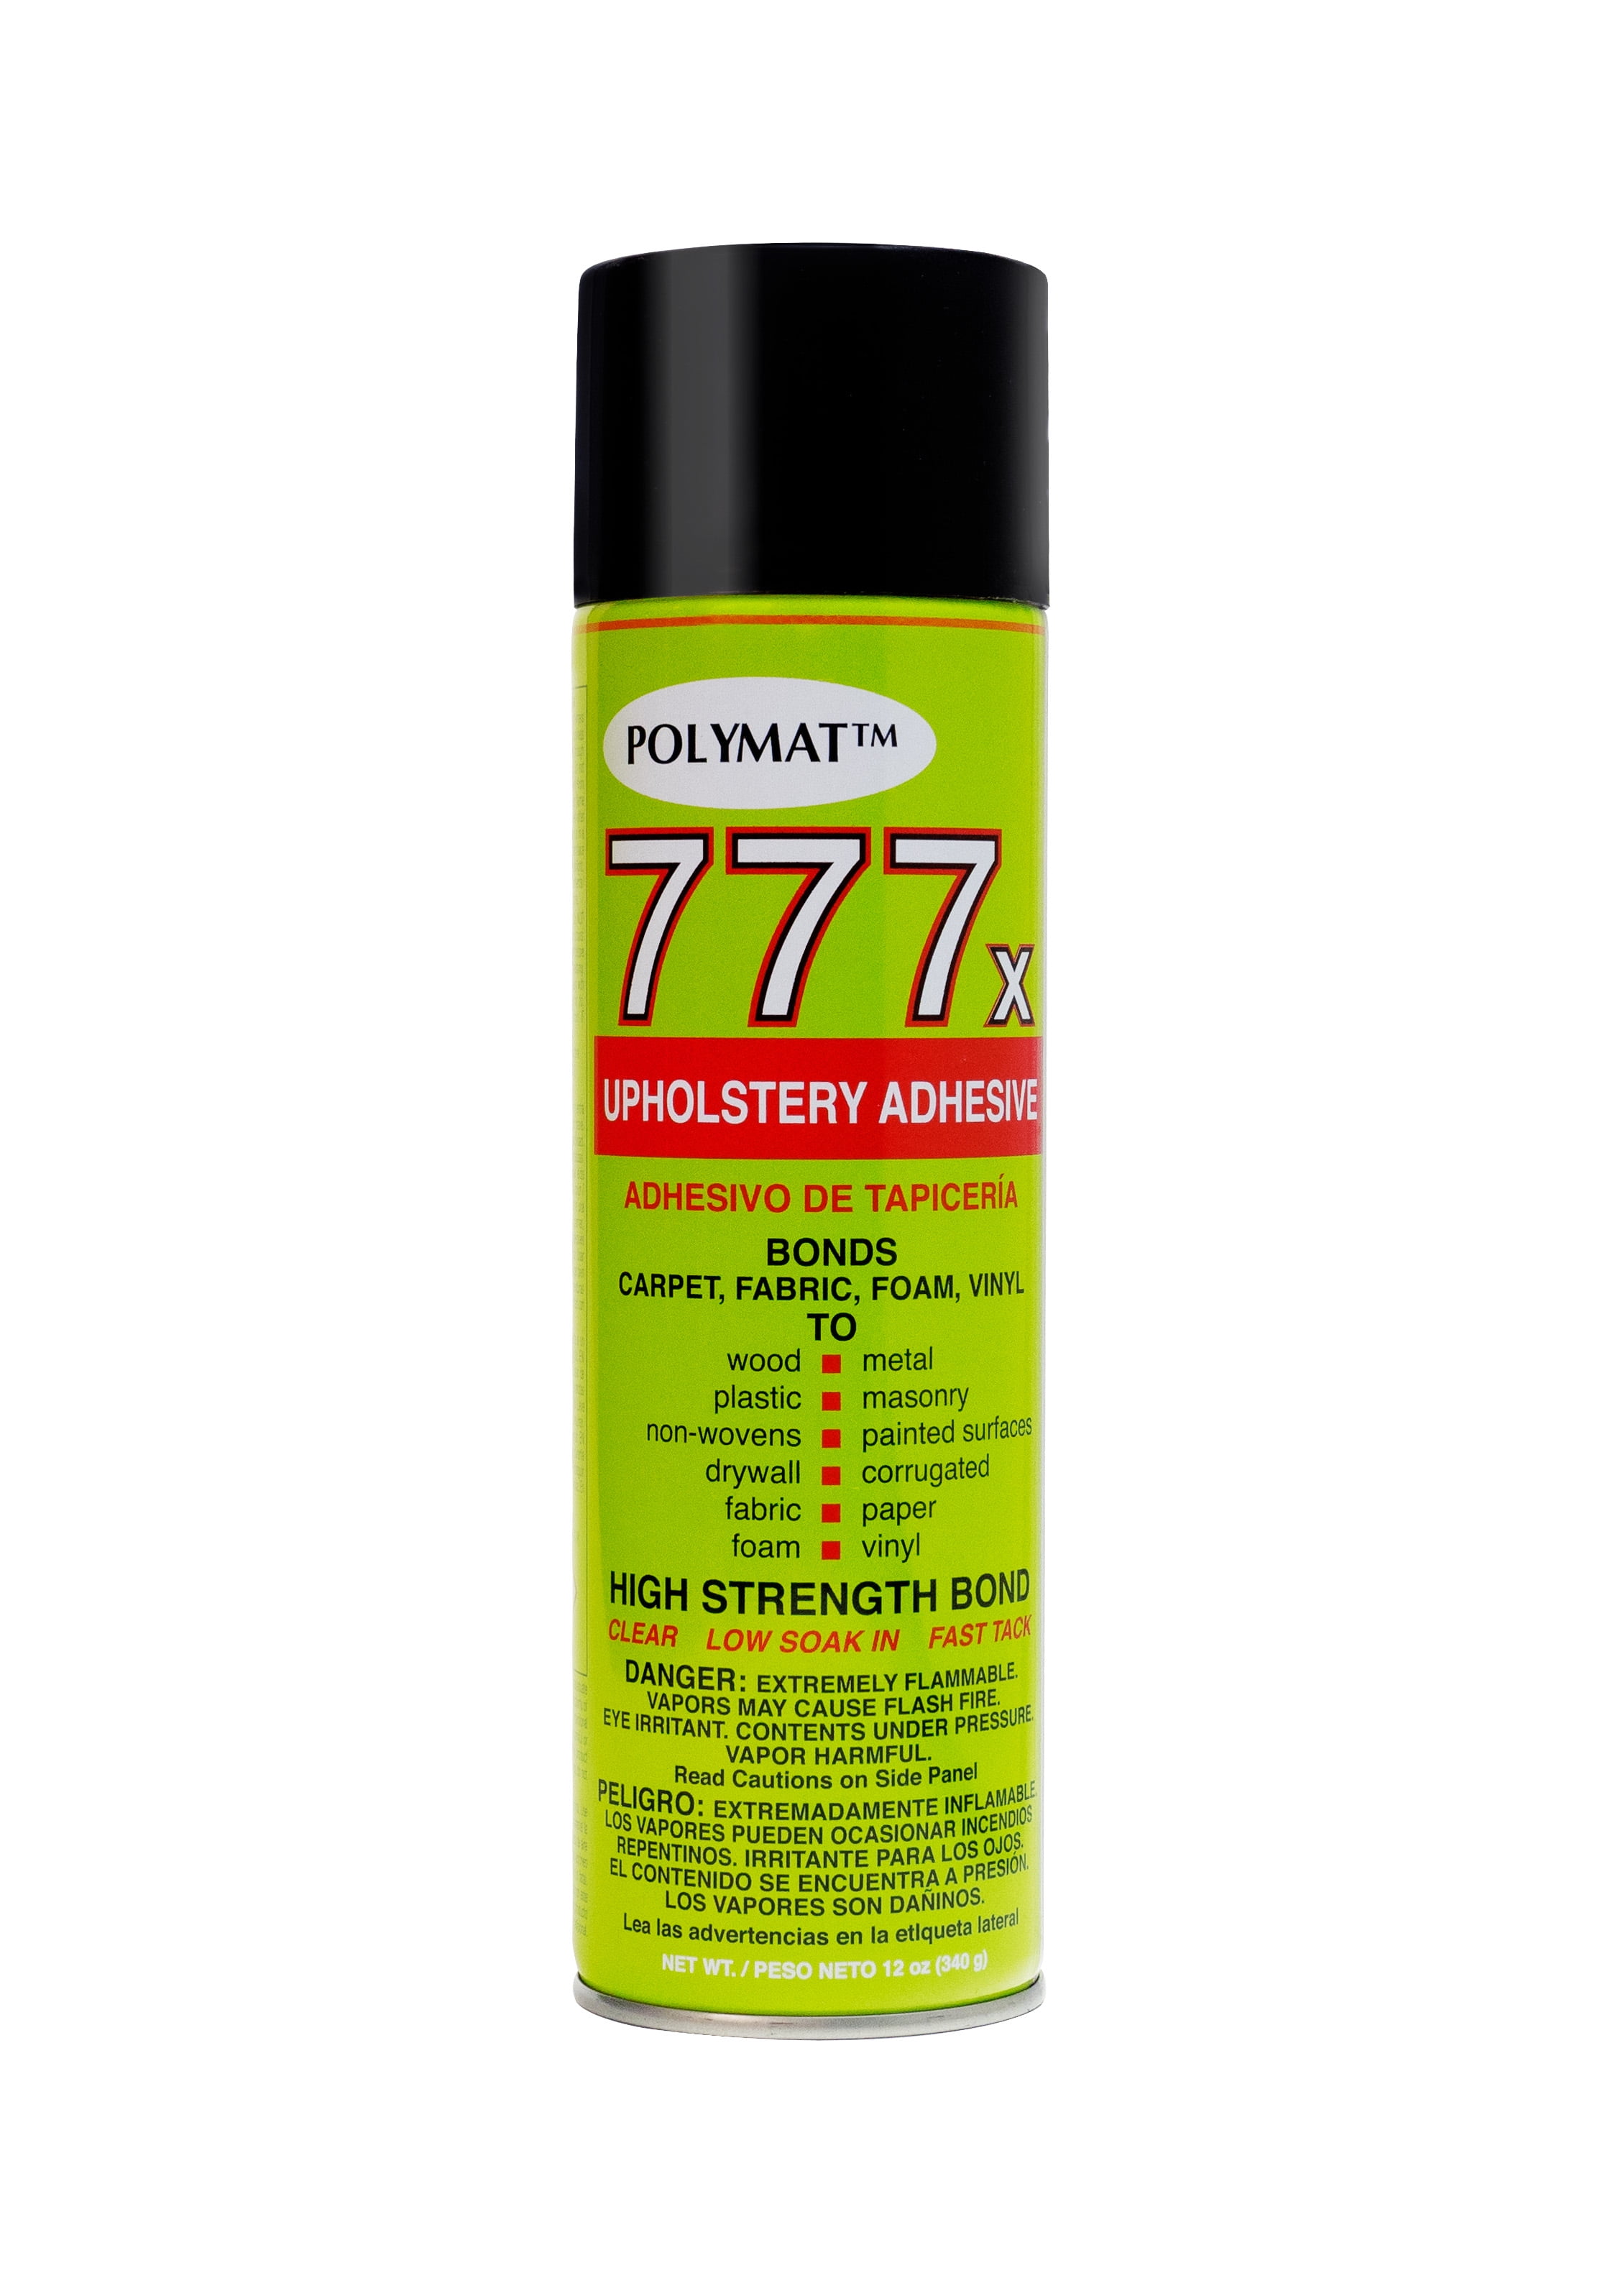 Best Commercial Wallpaper Glue (Adhesive)  Roman Pro-838 Heavy Duty Clear  Wallpaper Adhesive 